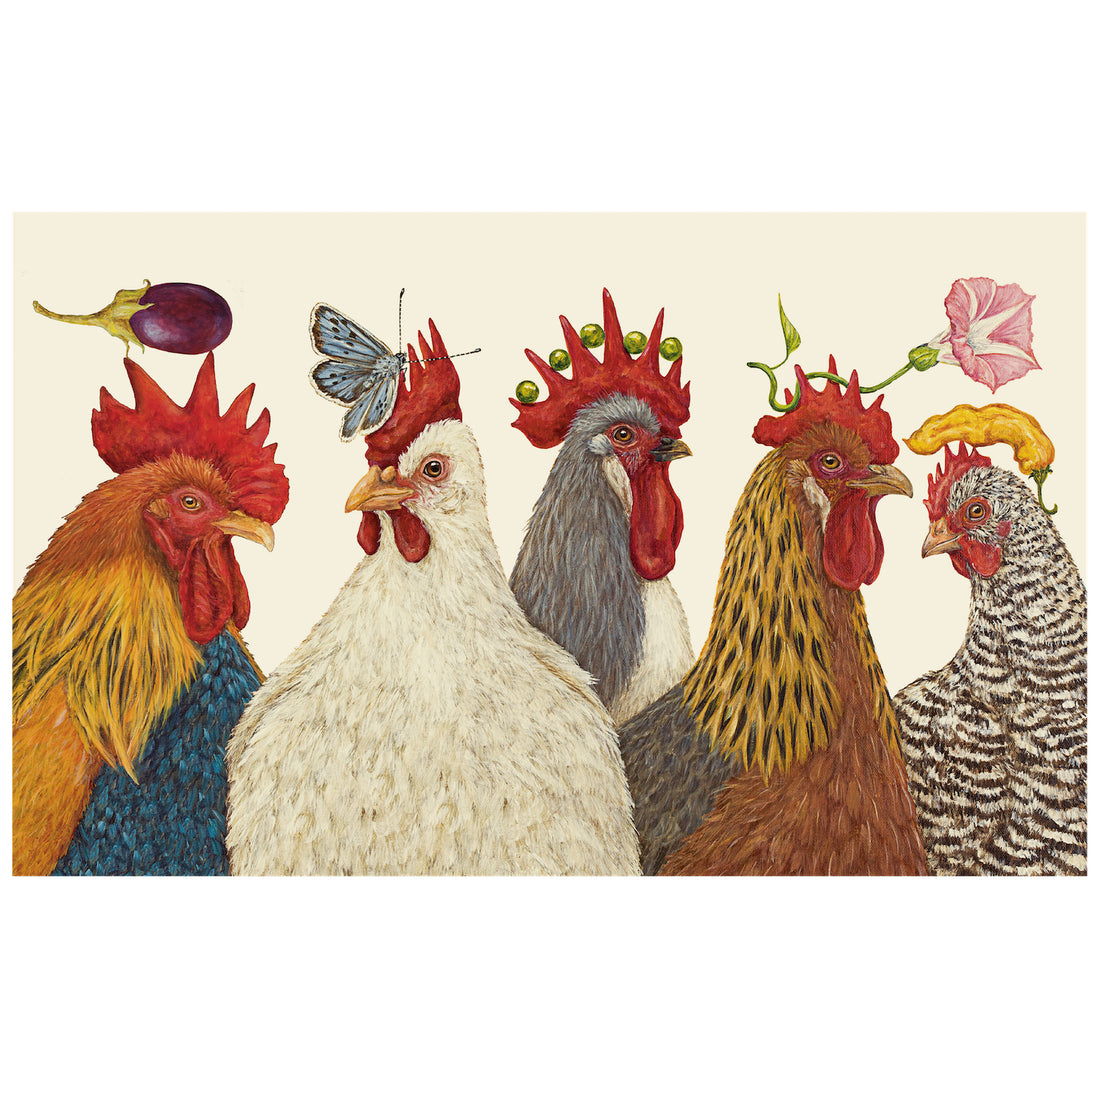 An illustration of five different chickens, wearing various botanicals on their heads, over a cream background.